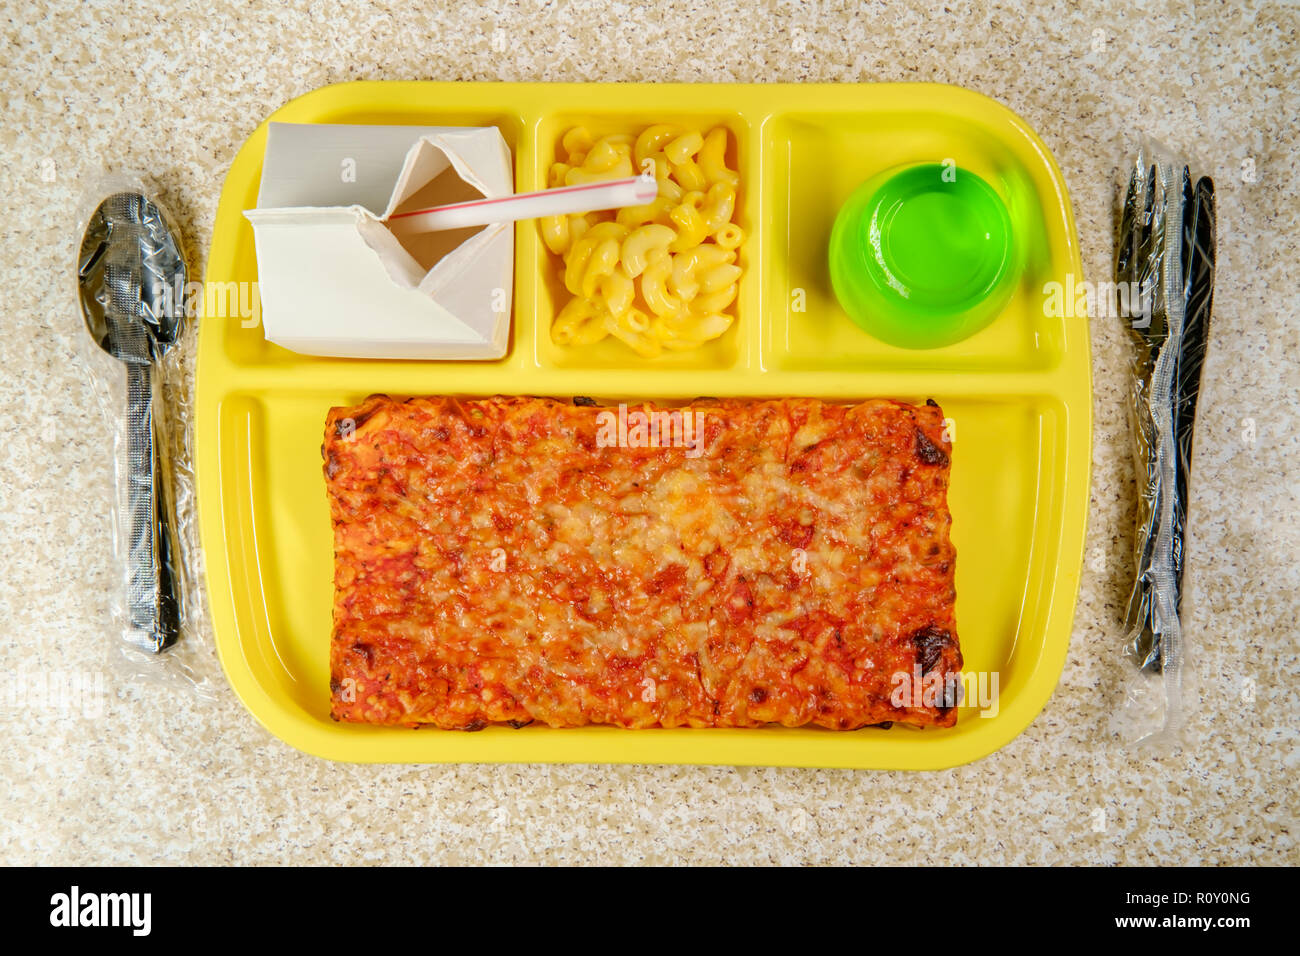 Grade school lunch tray with pizza with small carton of milk mac-n-cheese and green gelatin for dessert Stock Photo